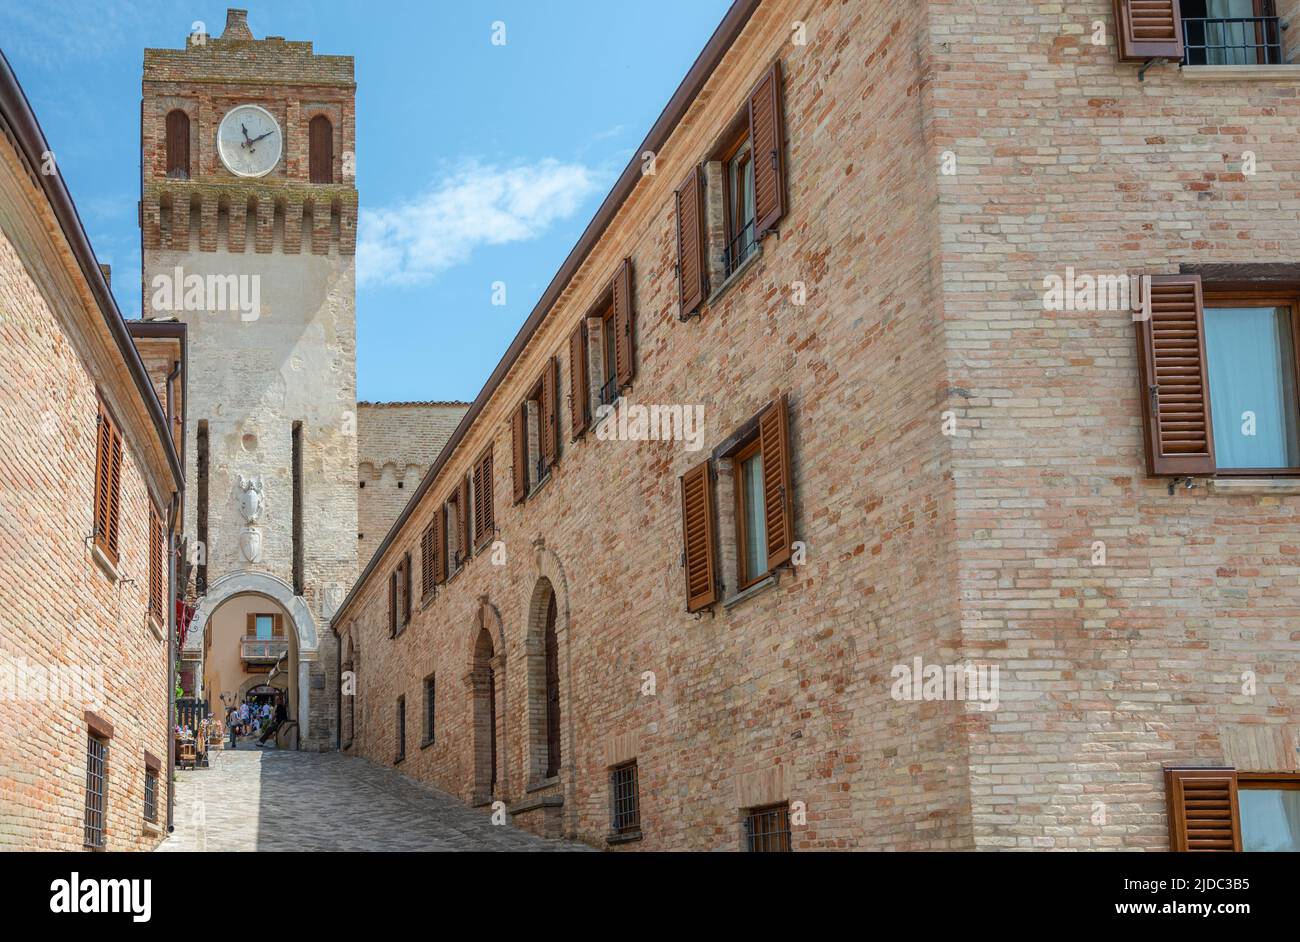 Gradara, Italy - May 29, 2018: View of the Firau tower with clock, ancient entrance to the medieval village Stock Photo